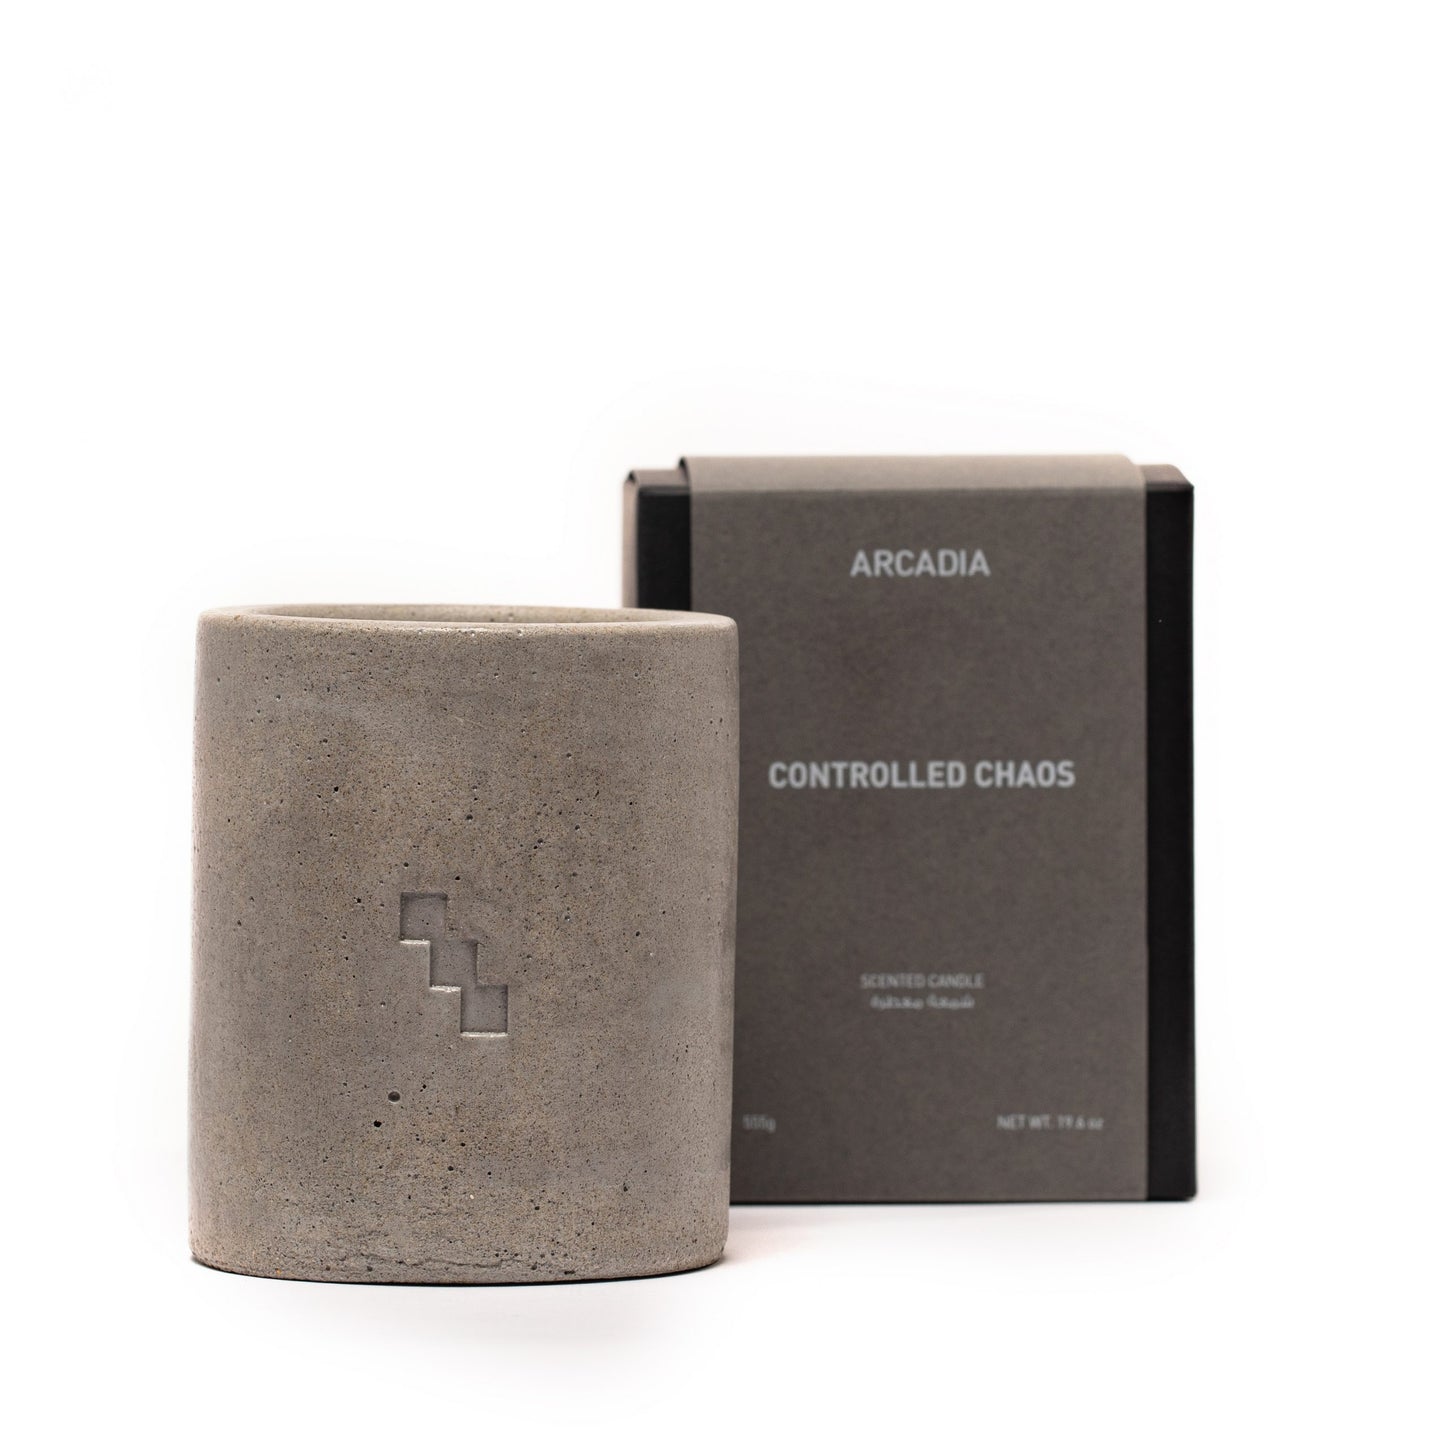 Controlled chaos candle - Home Fragrance 